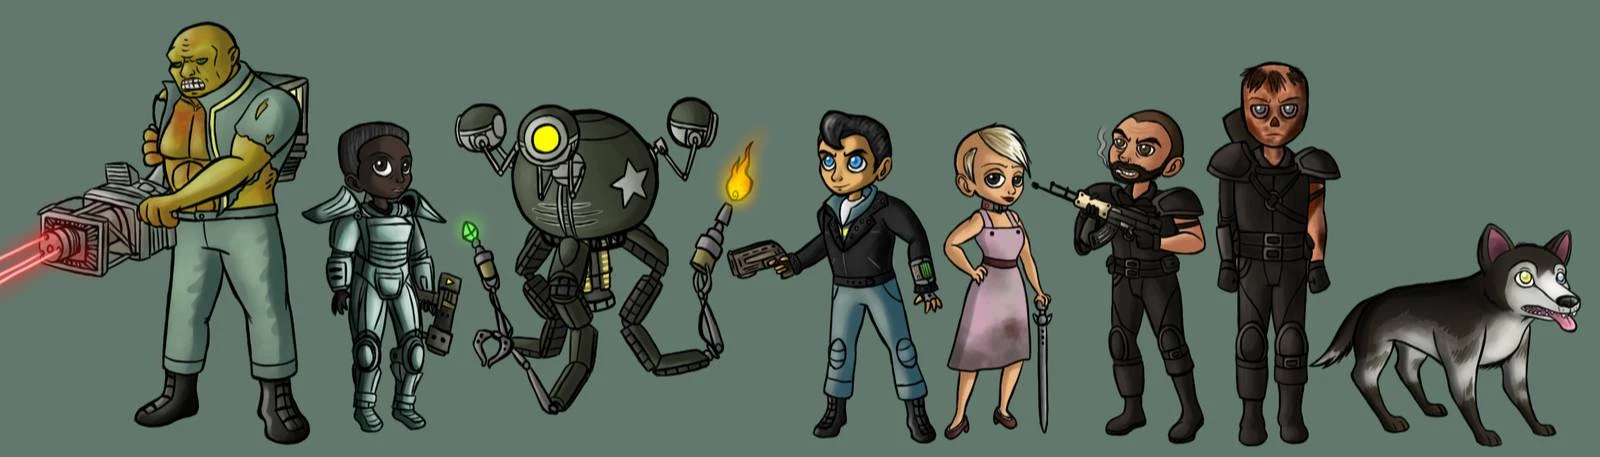 Heres a series I did of every companion in Fallout 3 (Mothership